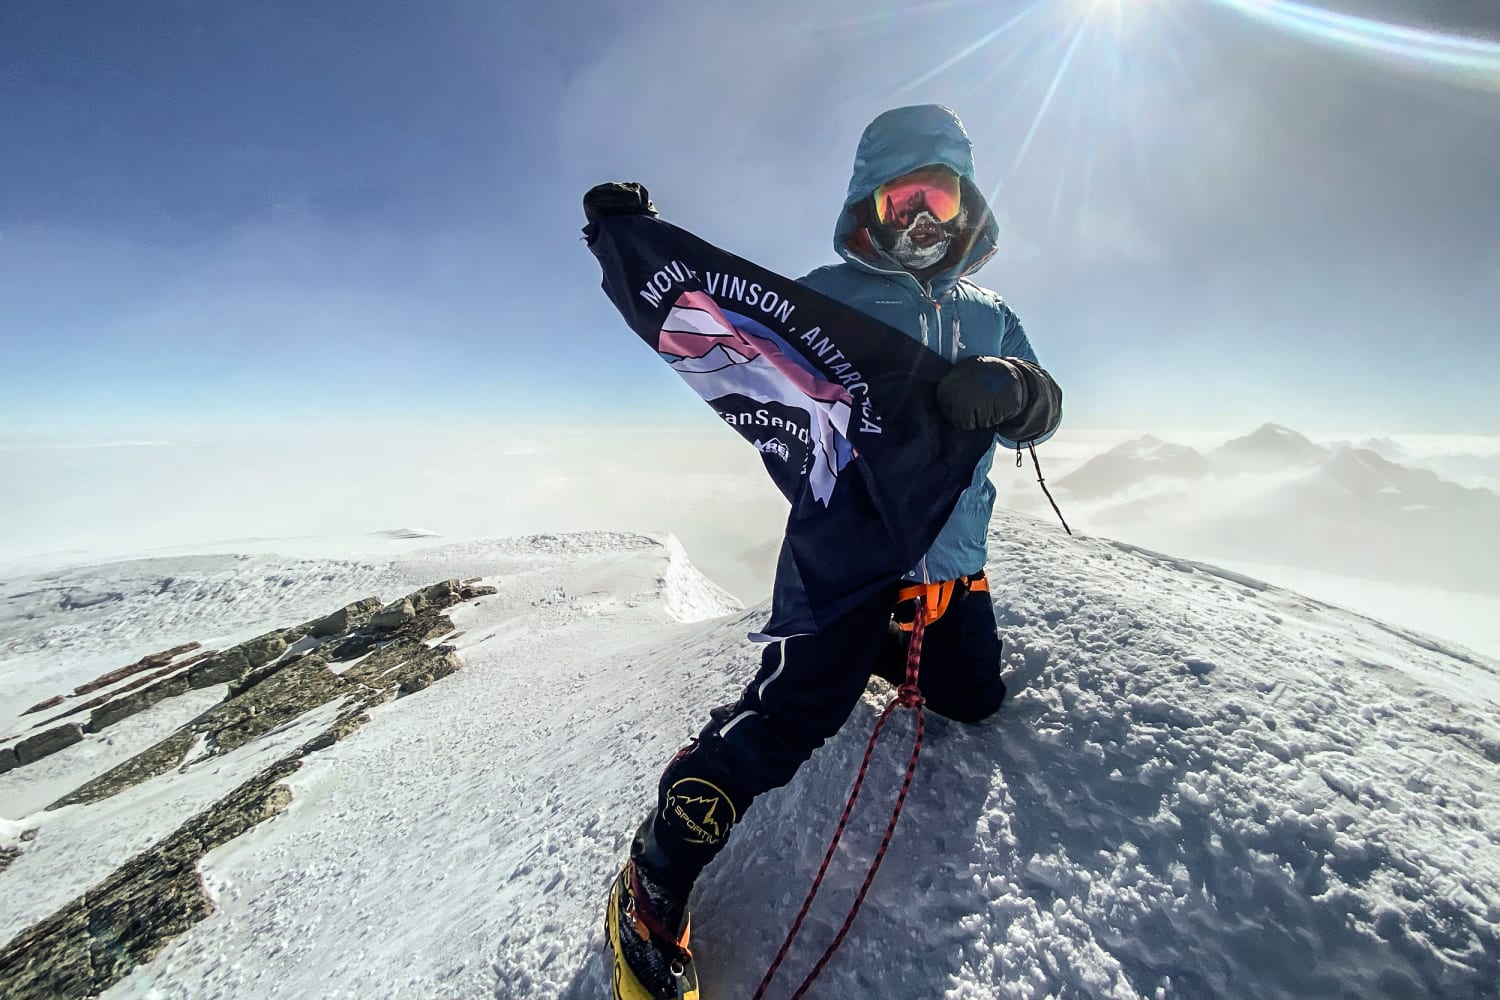 Meet the mountaineer flying the trans Pride flag on the worlds highest peaks photo